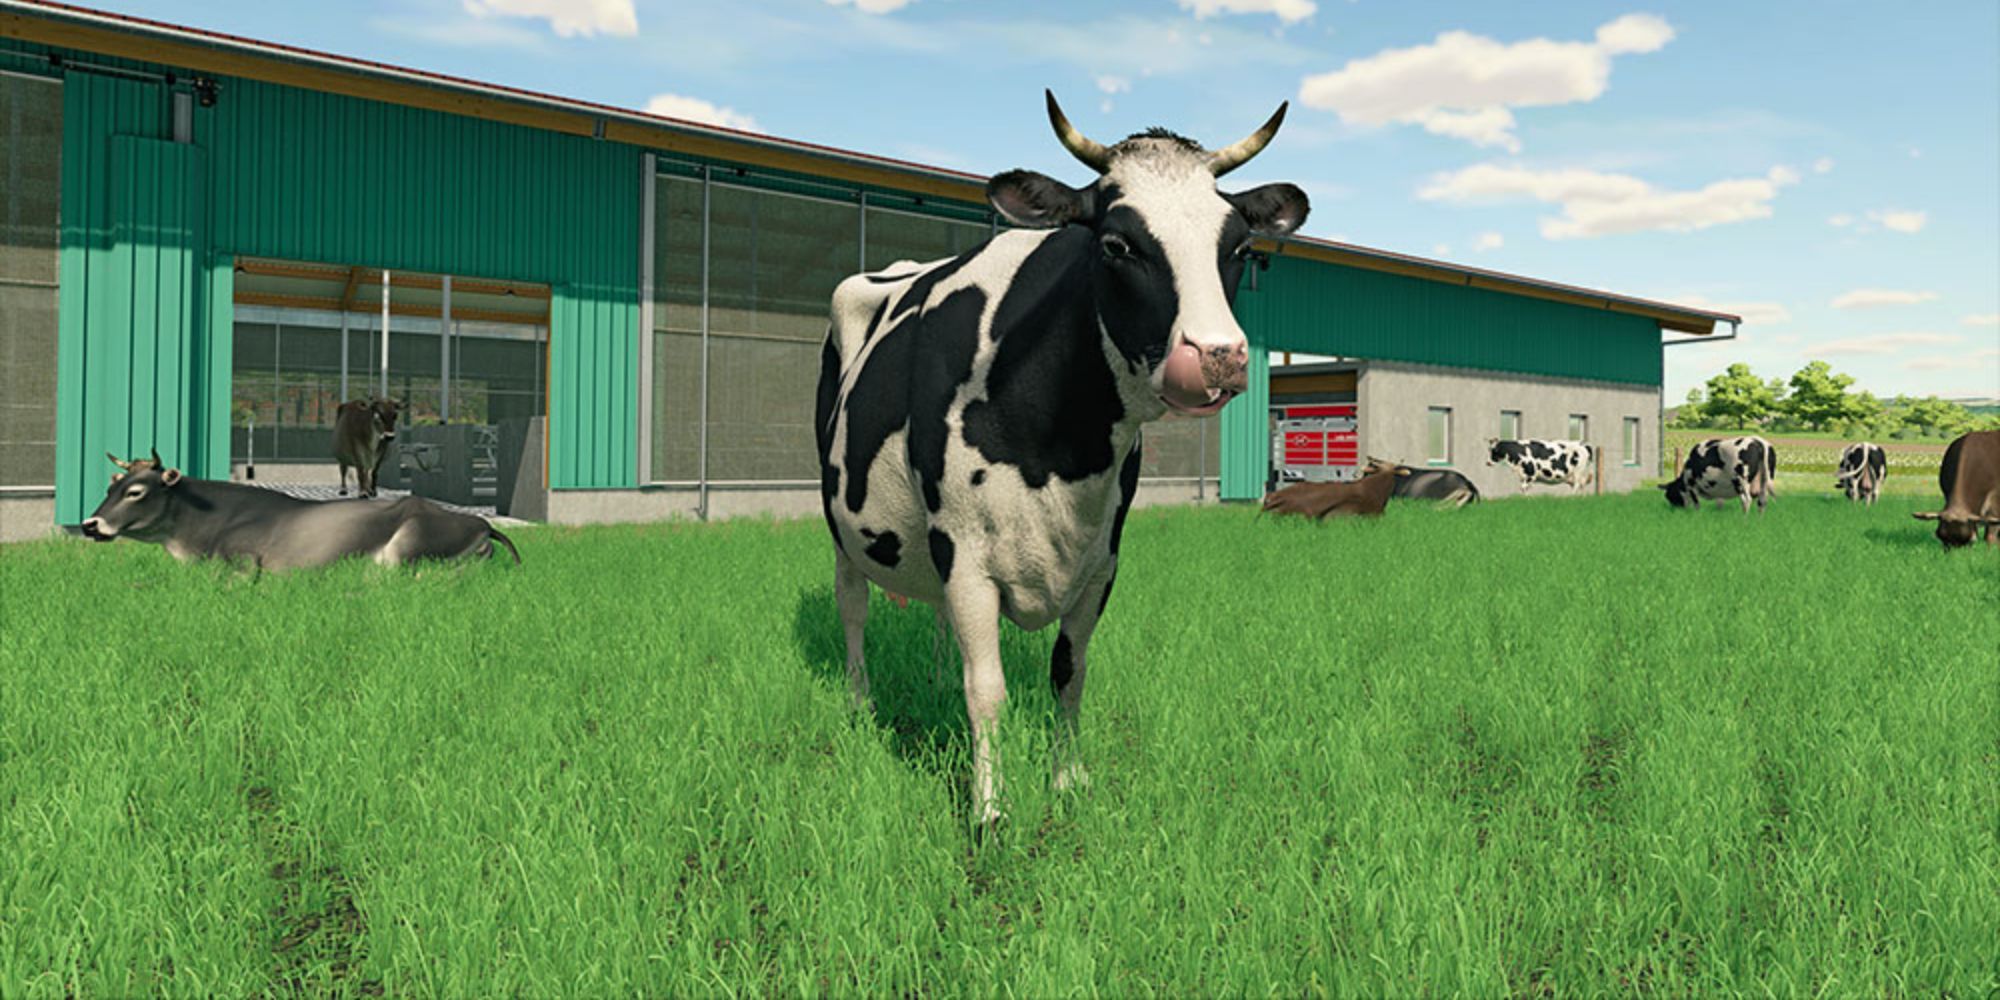 Close-up of a cow with other cows in the background of the field in Farming Simulator 22